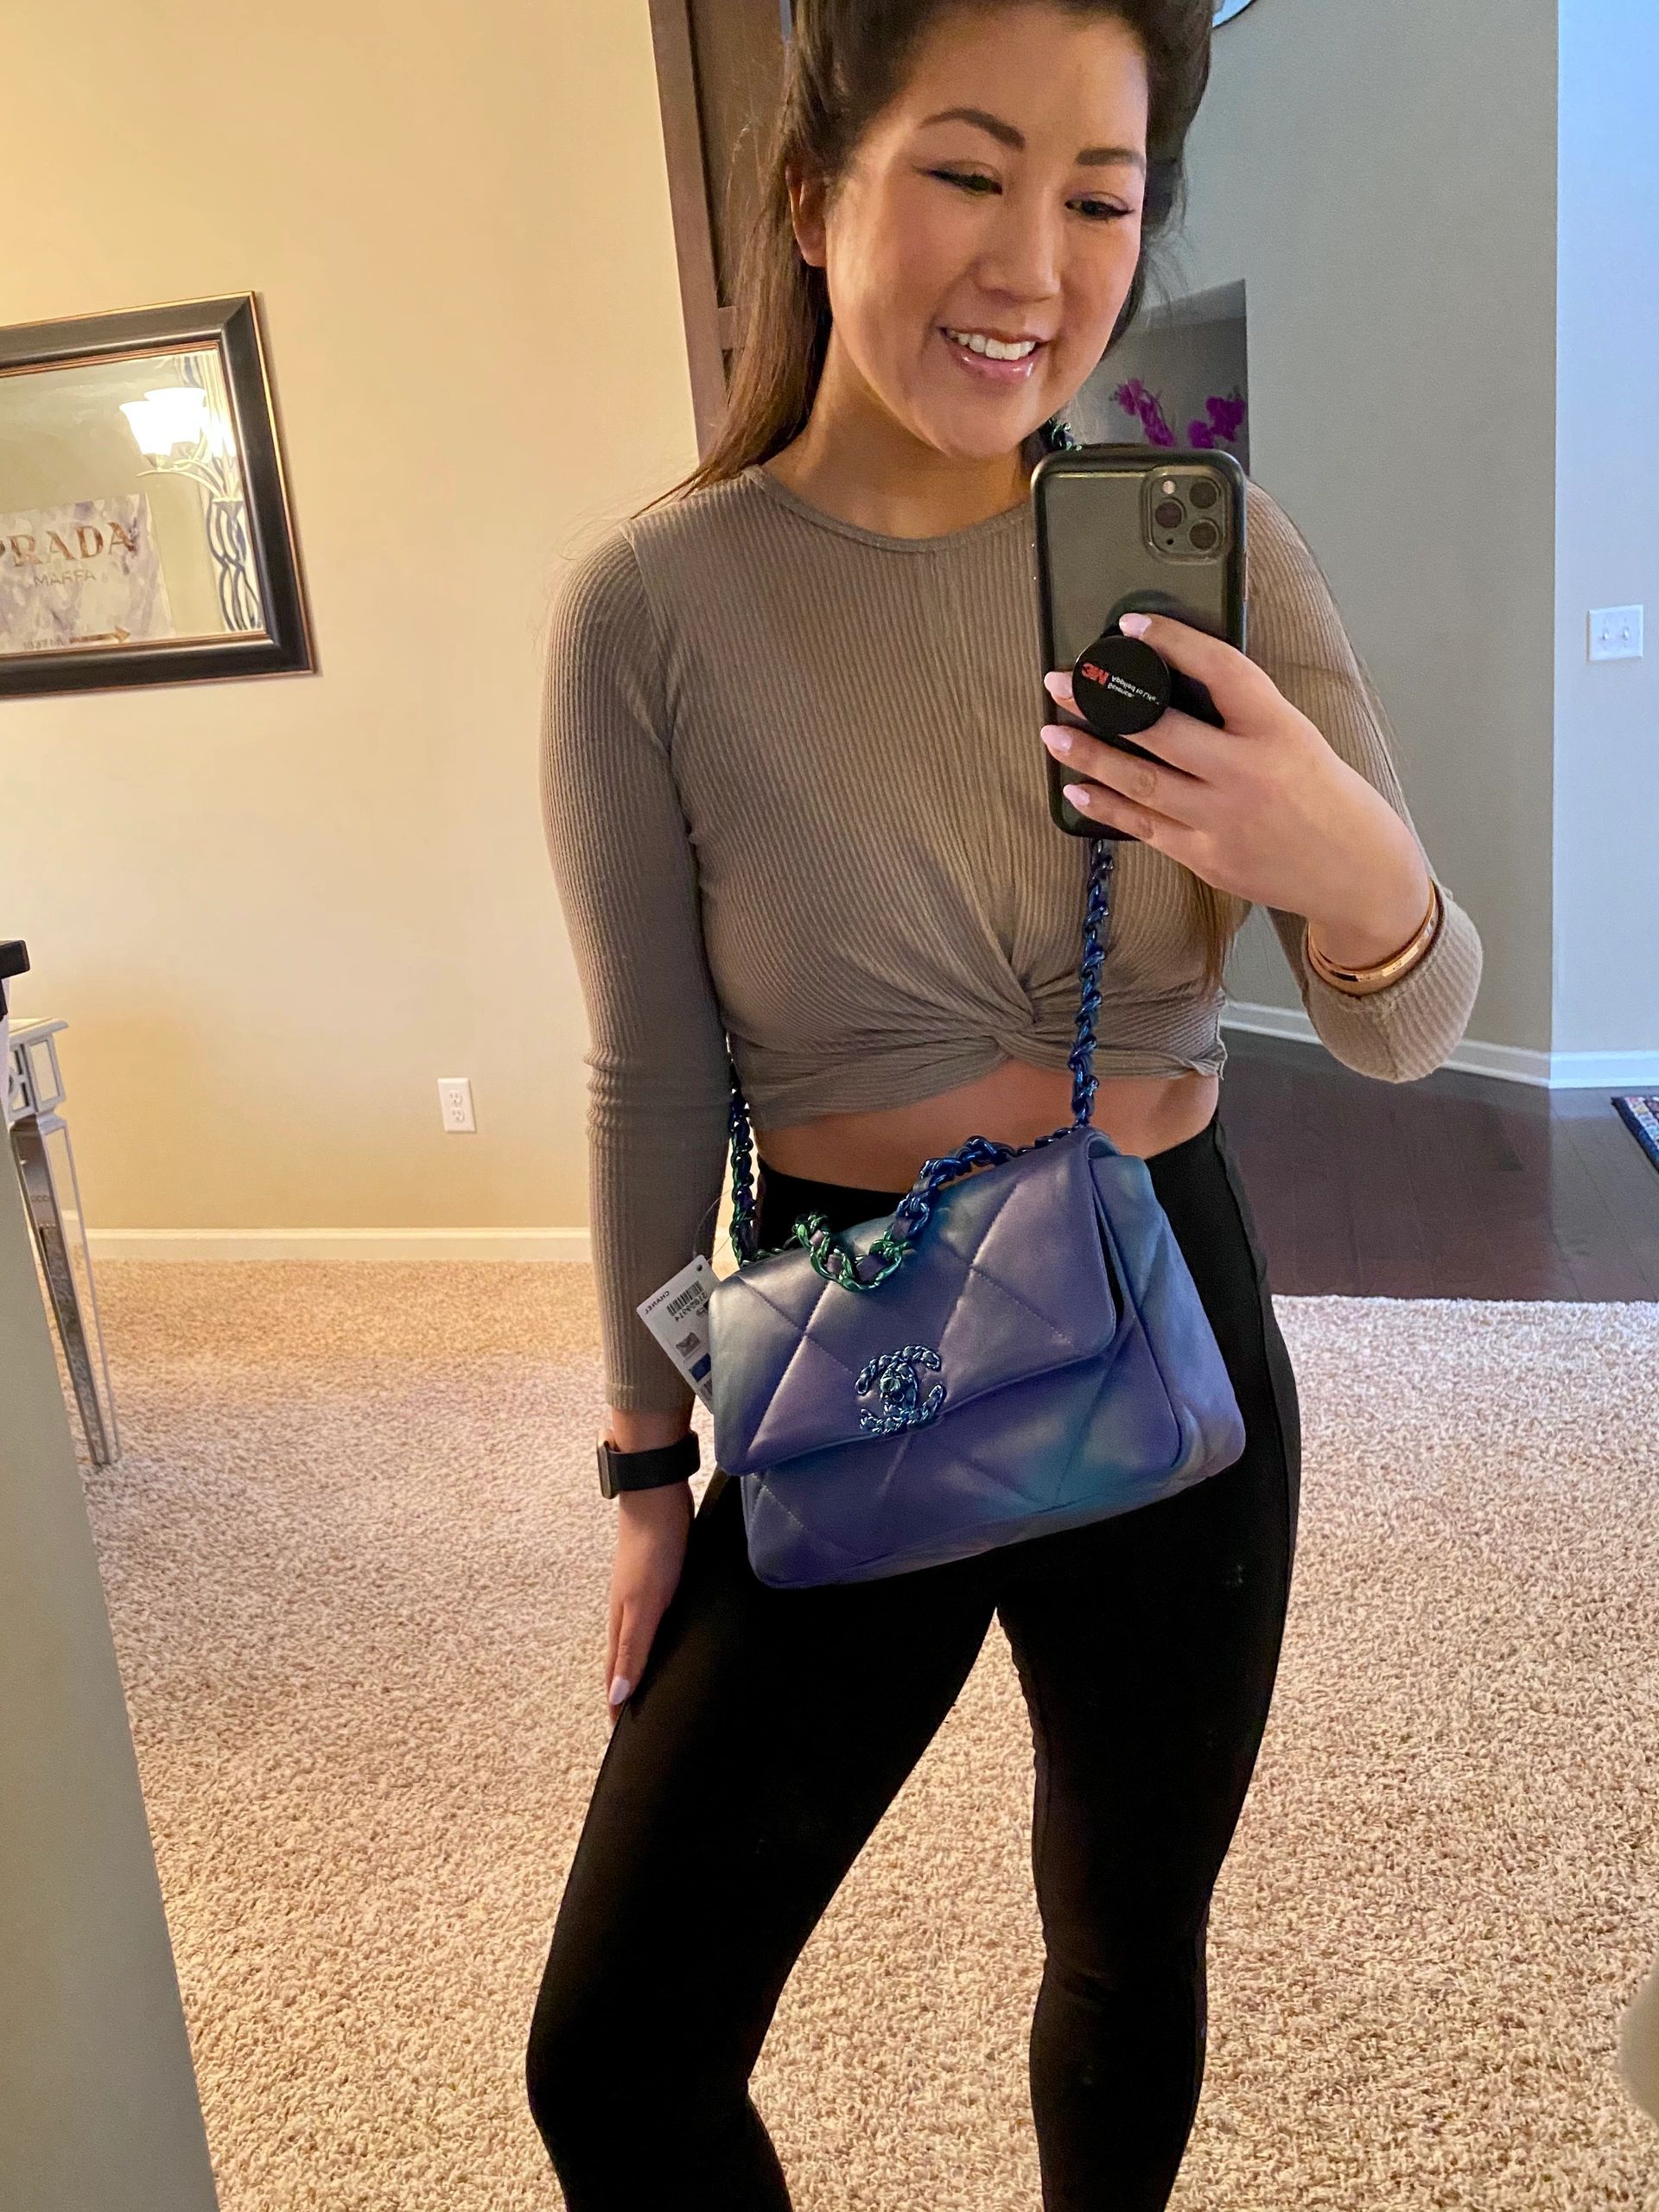 CHANEL GABRIELLE HOBO SMALL: WHAT FITS, MOD SHOTS, WAYS TO WEAR